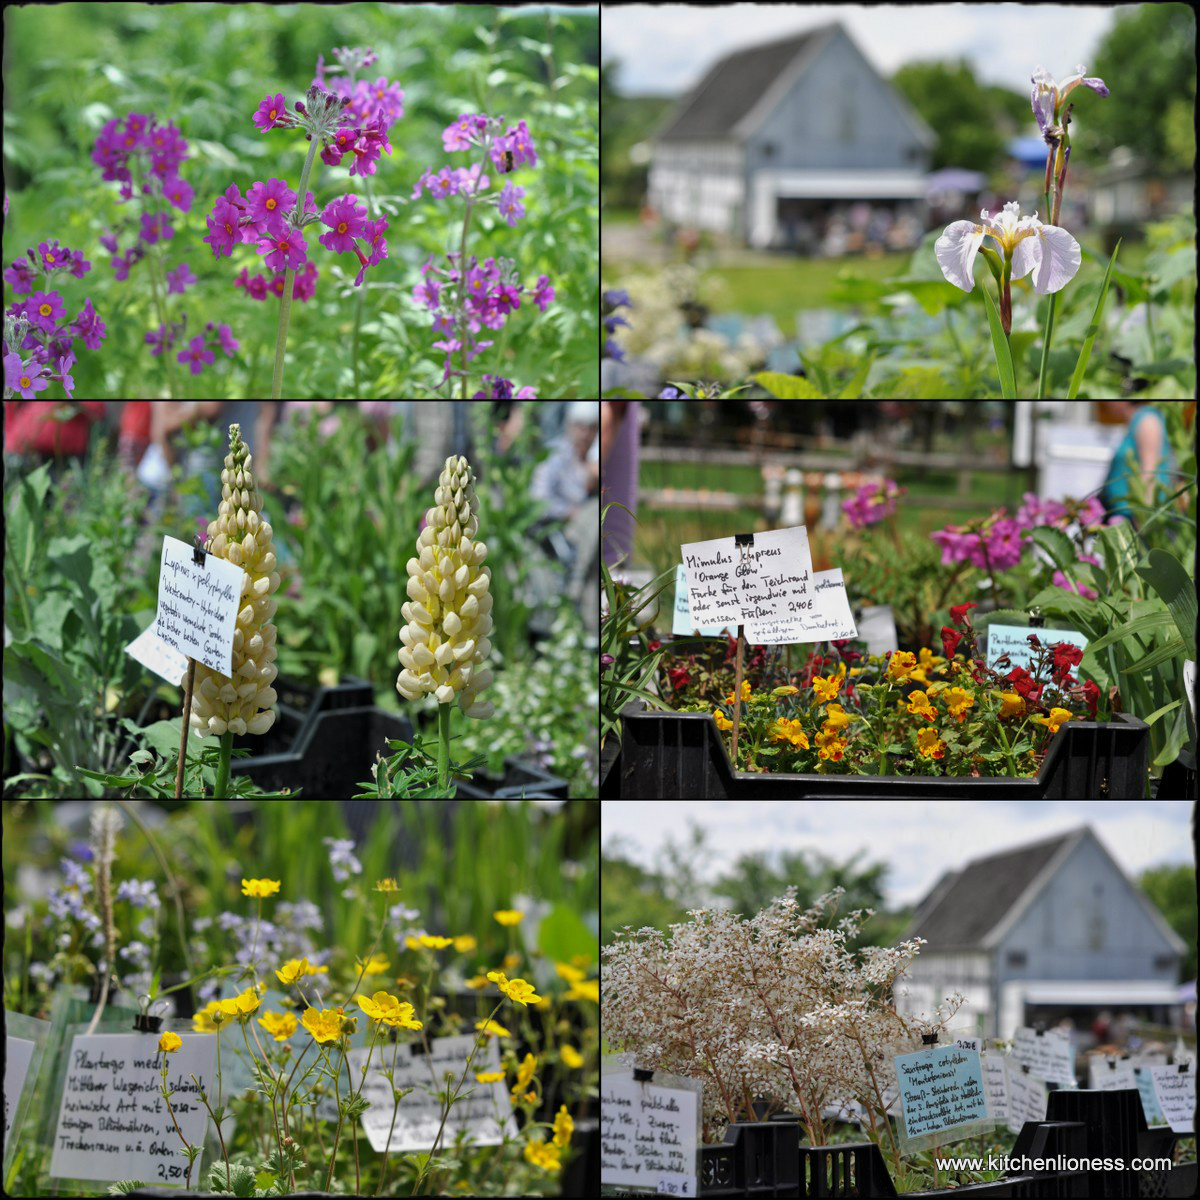 The Kitchen Lioness: Heritage Plant and Garden Show - 